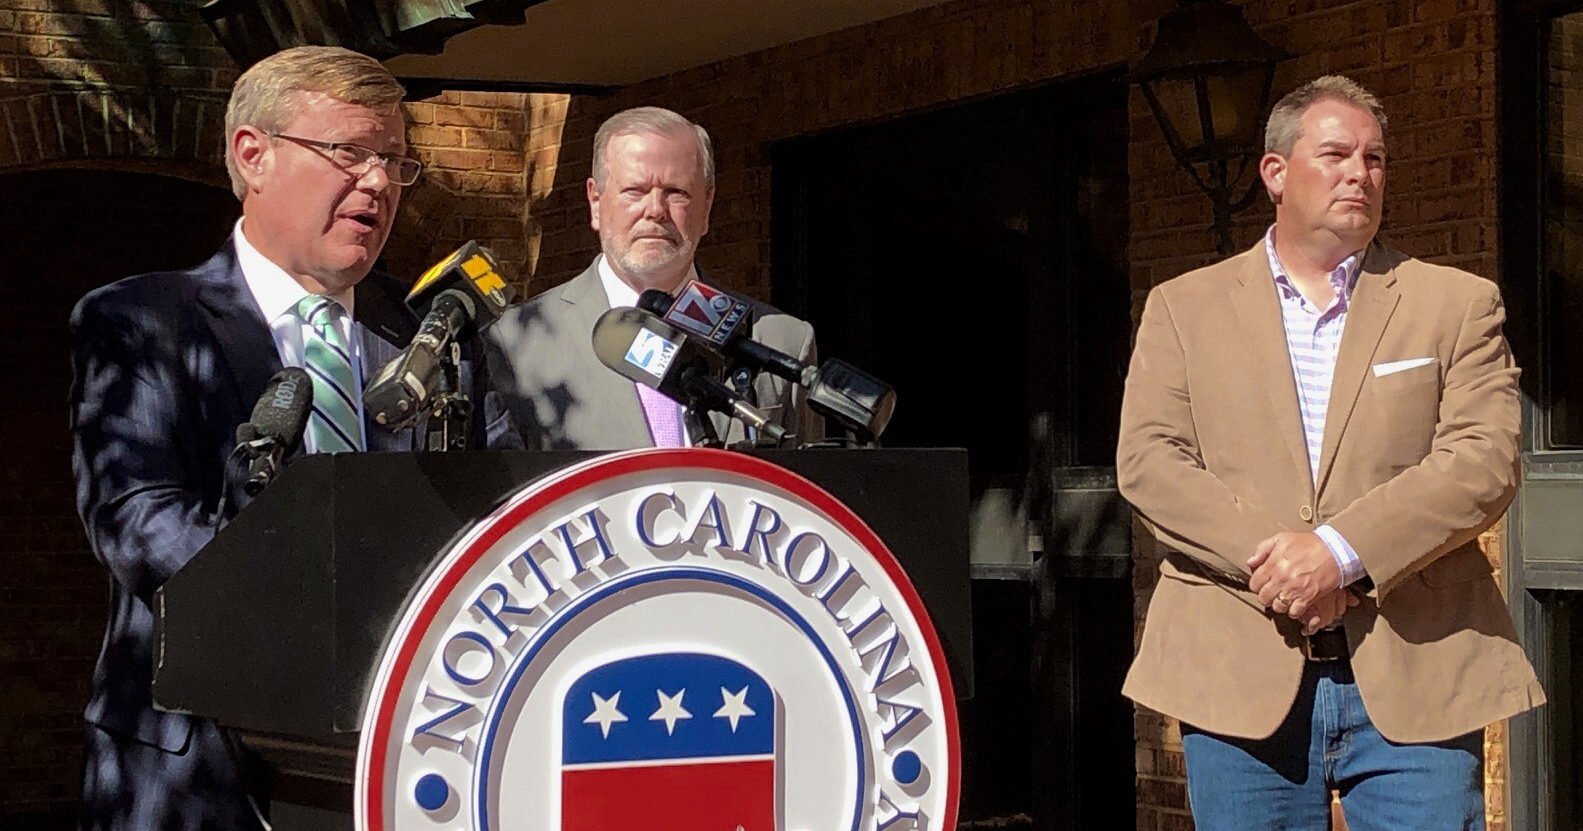 Republican North Carolina House Speaker Tim Moore speaks to reporters with Senate leader Phil Berger, left, and House Majority Leader John Bell, right, at a news conference on Nov. 4, 2020, at state GOP headquarters in Raleigh, North Carolina, to discuss Election Day results.